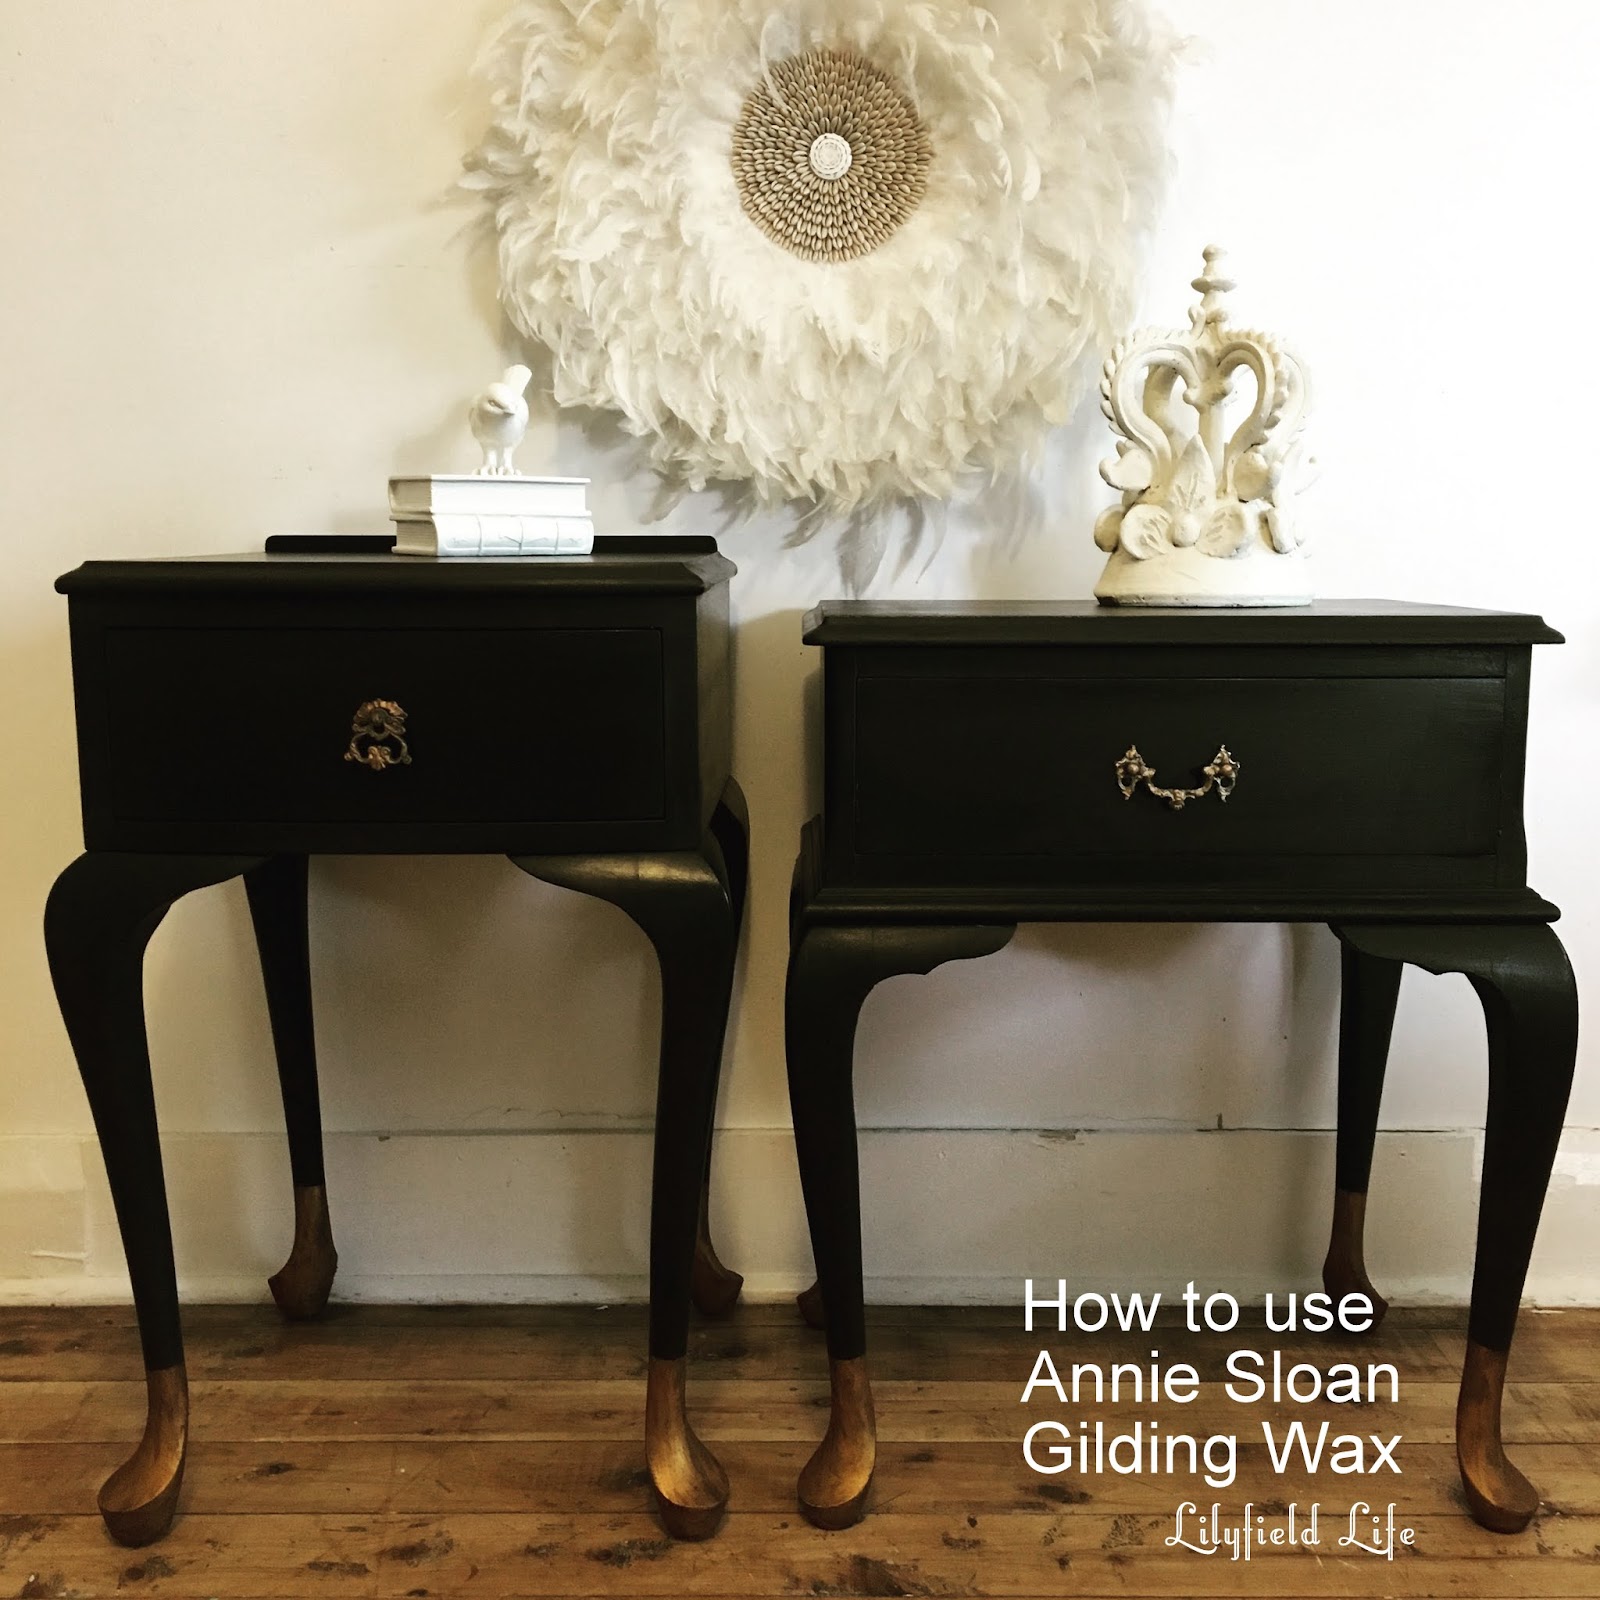 Lilyfield Life: How to use Annie Sloan Gilding Wax